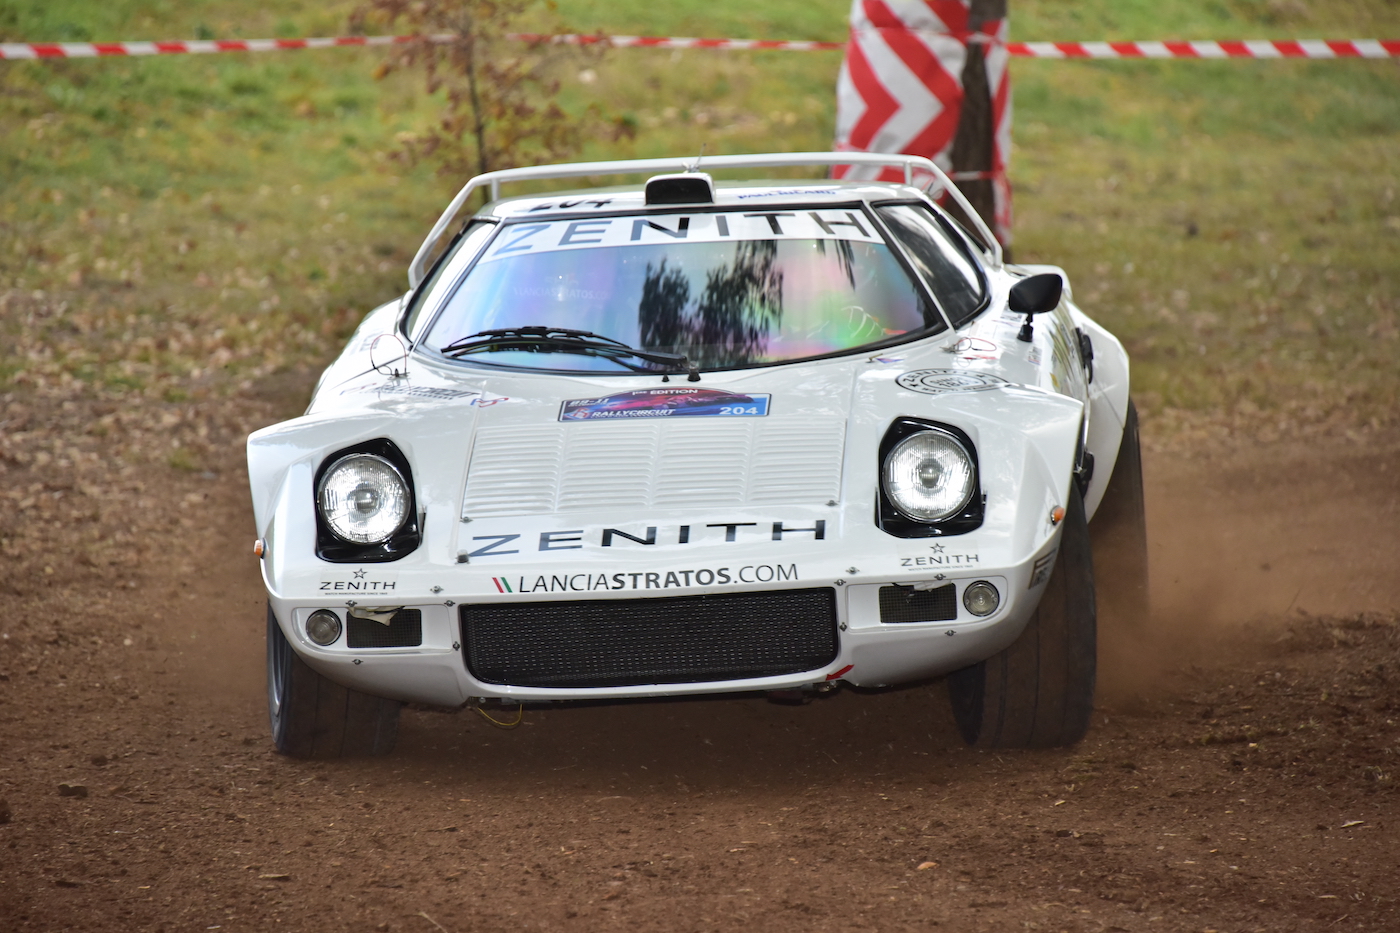 Lancia Stratos in front